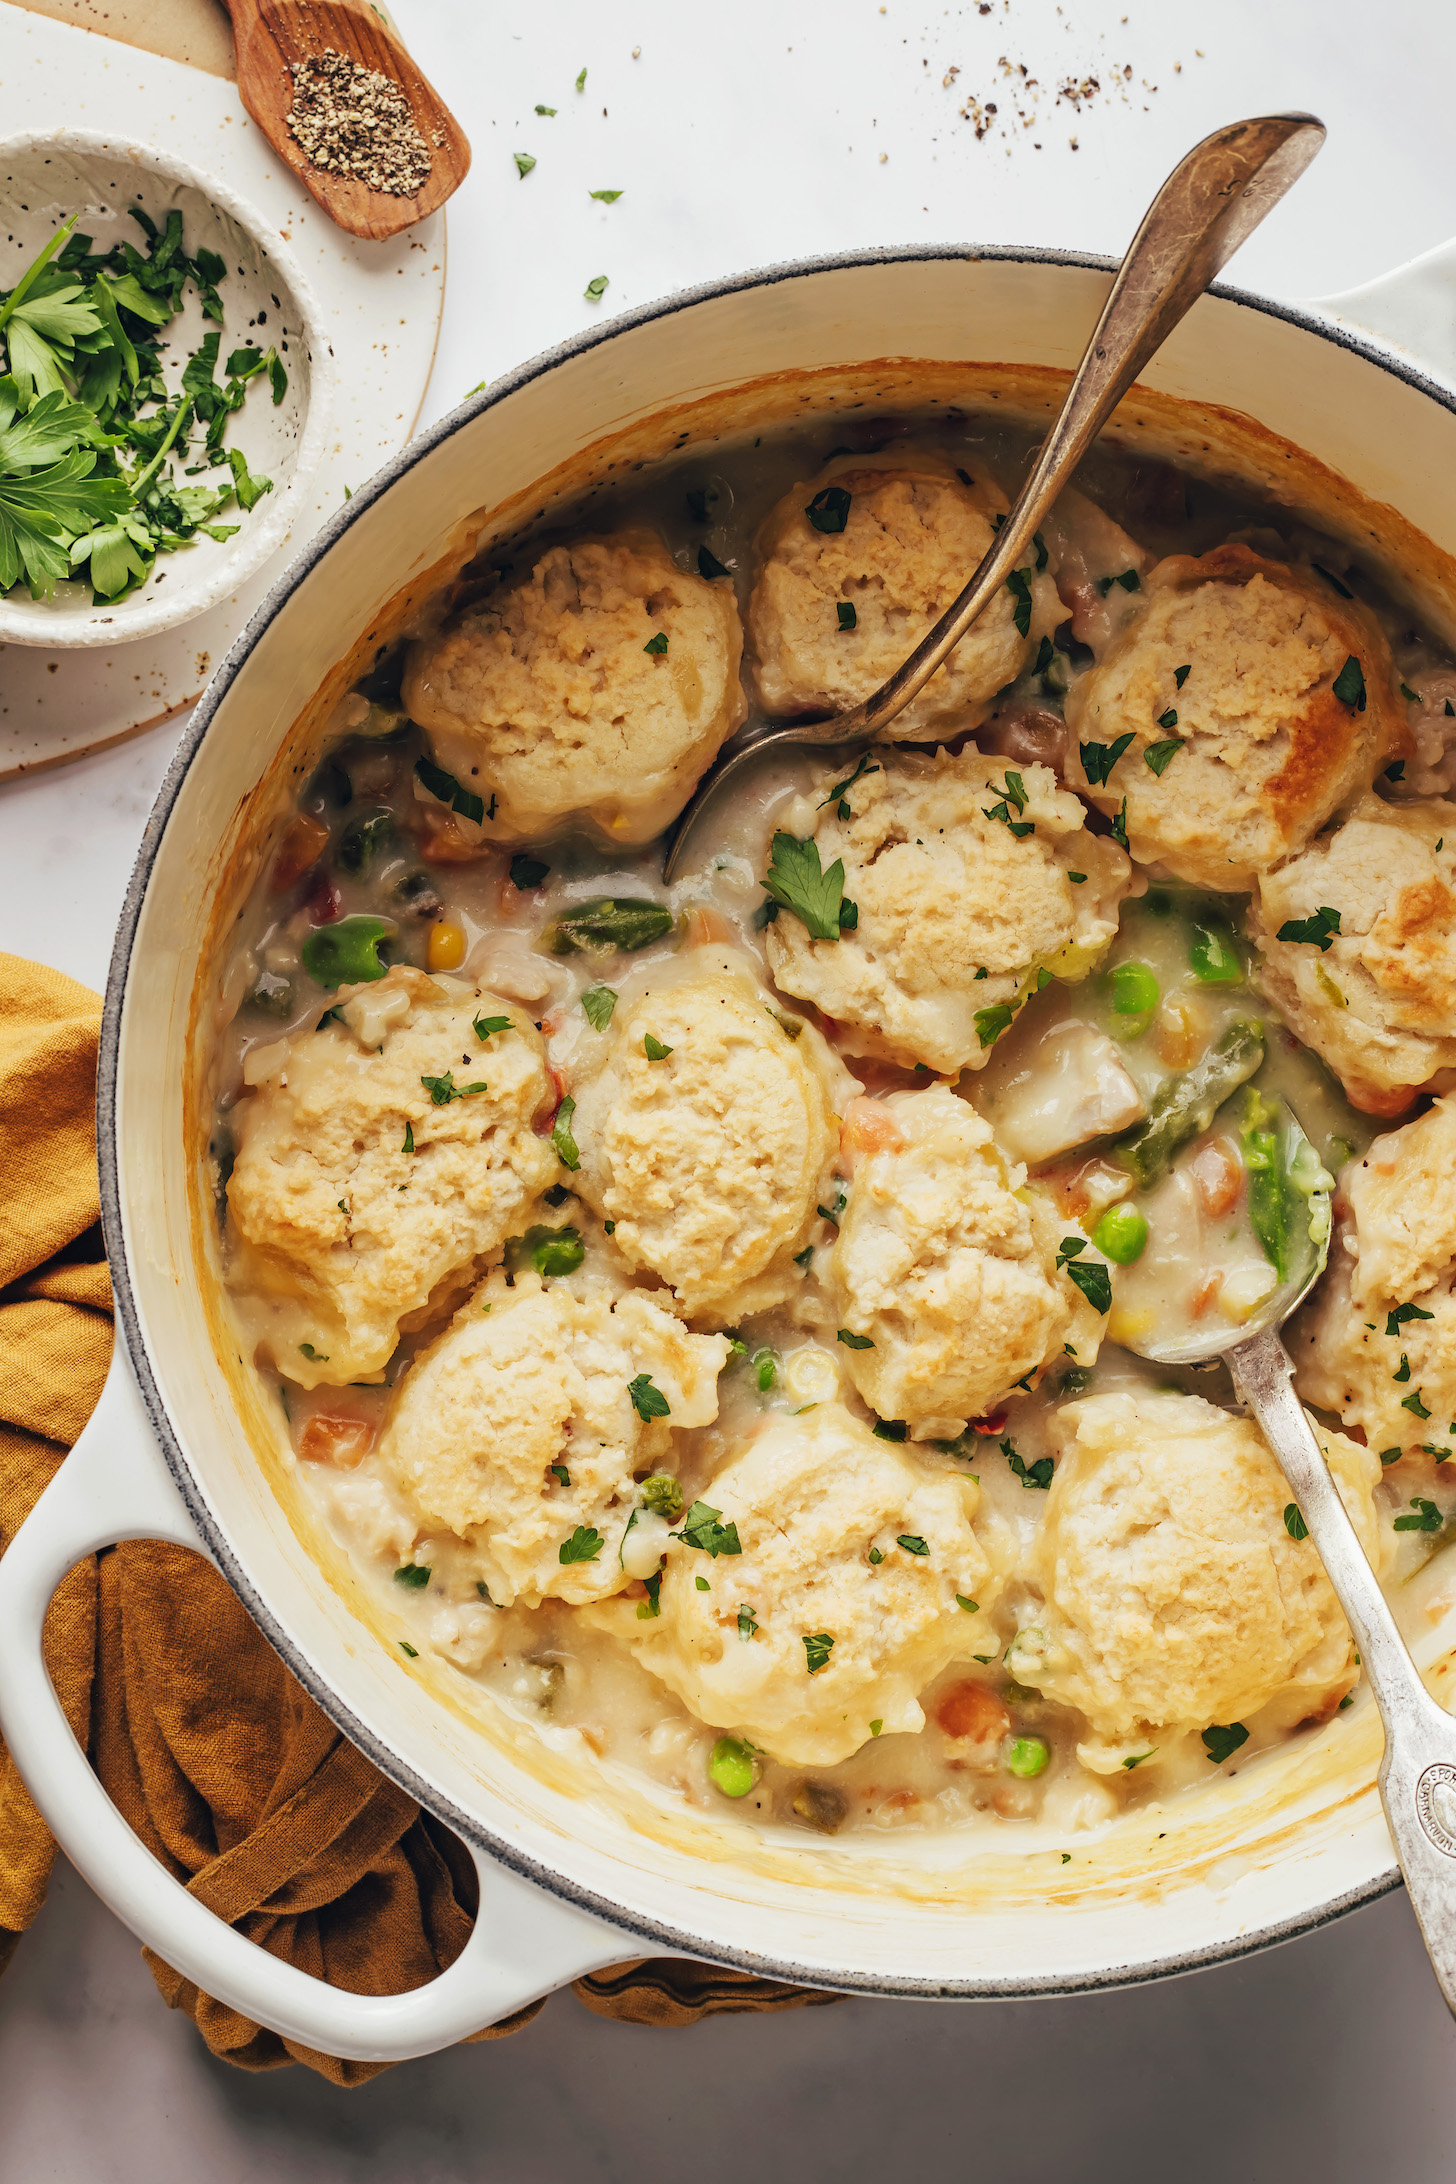 Lightly browned gluten-free and dairy-free biscuits over chicken pot pie soup